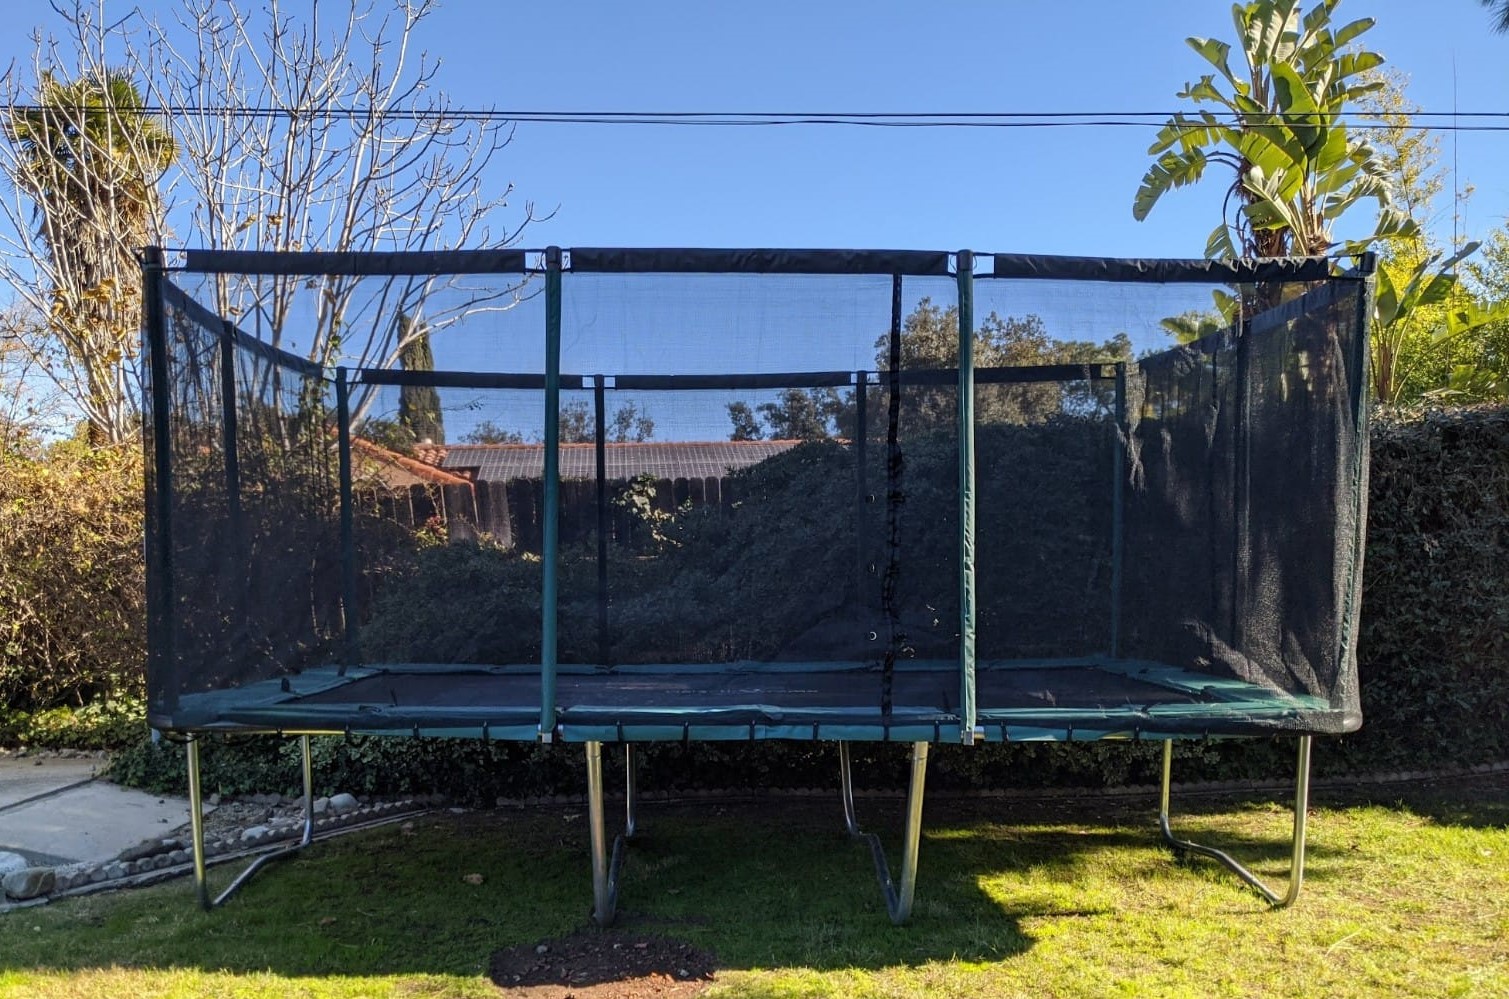 Galactic Xtreme 10x17 FT Outdoor Rectangle Trampoline with Net Enclosure 750Lbs Heavy Weight Jumping Capacity - Outdoor Gymnastics Trampolines for Adults and Kids - image 1 of 7